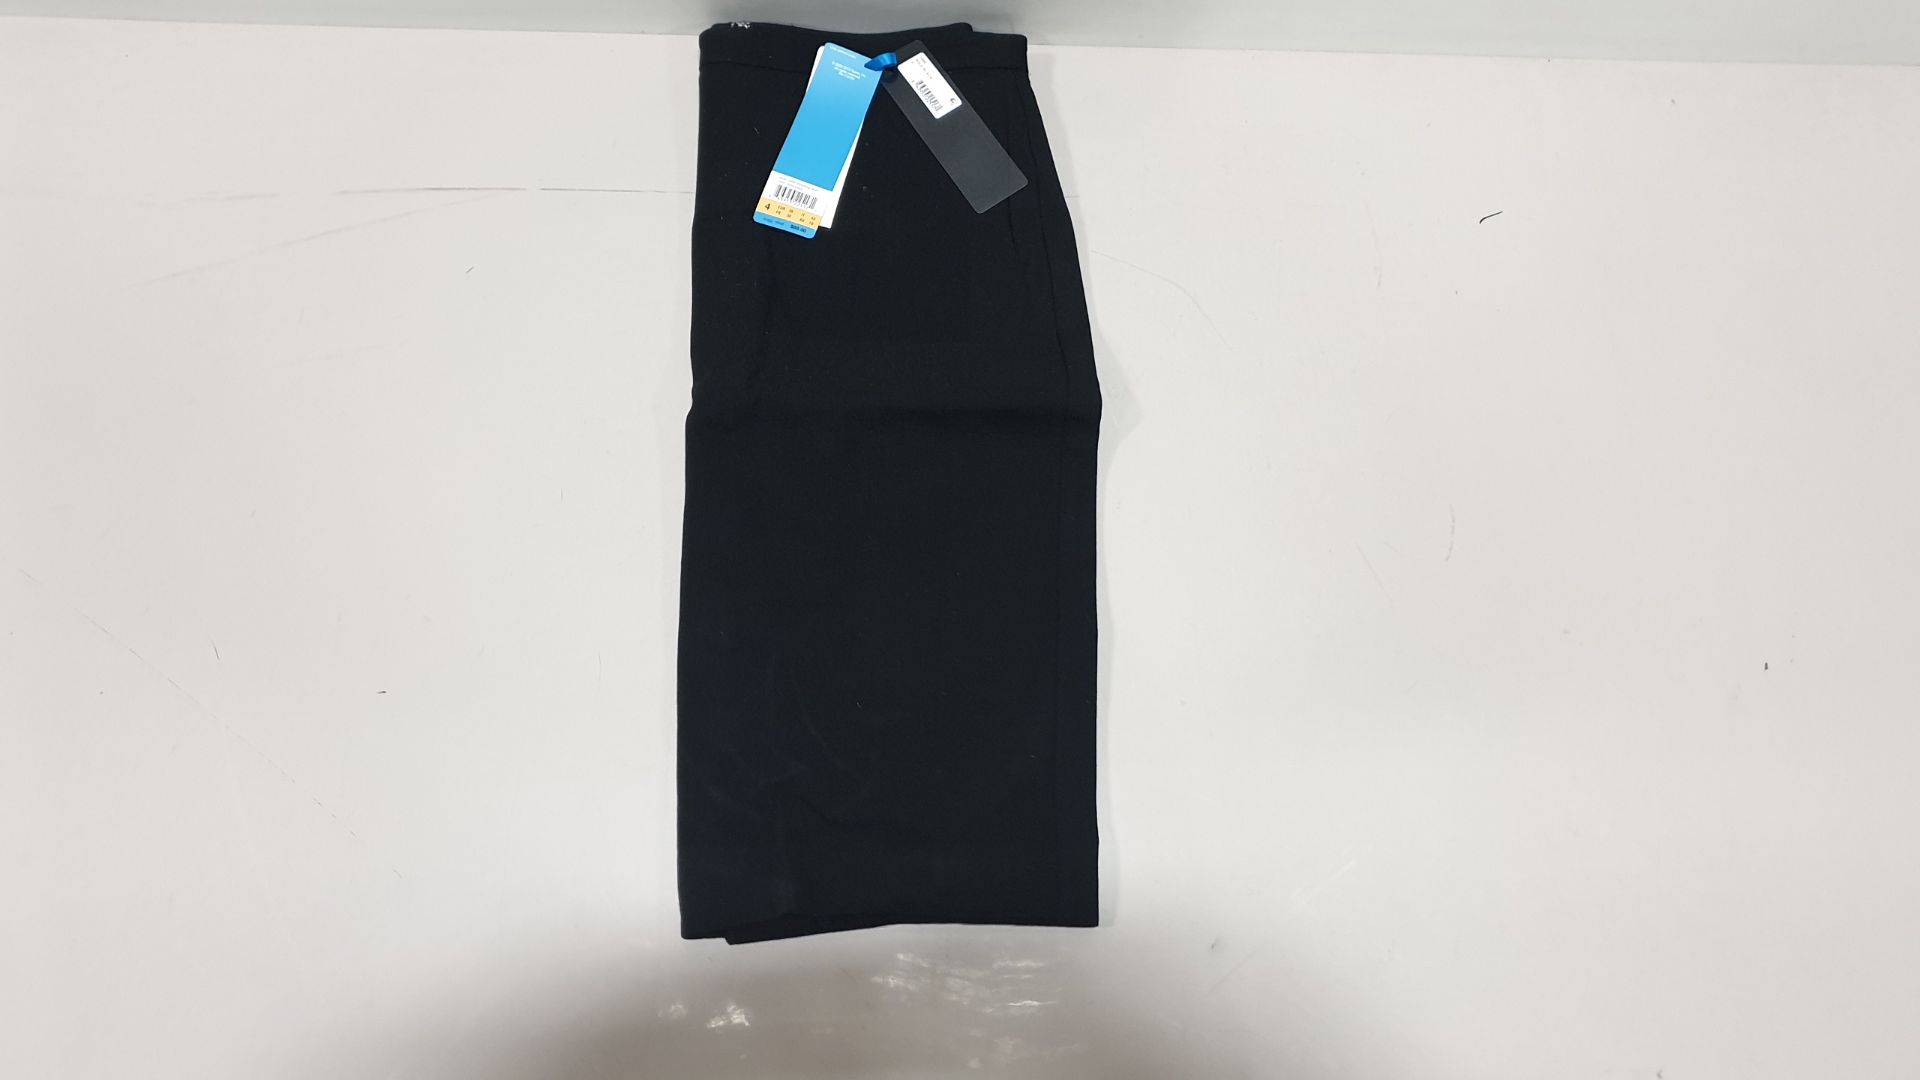 20 X SPANX SLIMMING SKIRTS SIZE 4 - $88 EACH